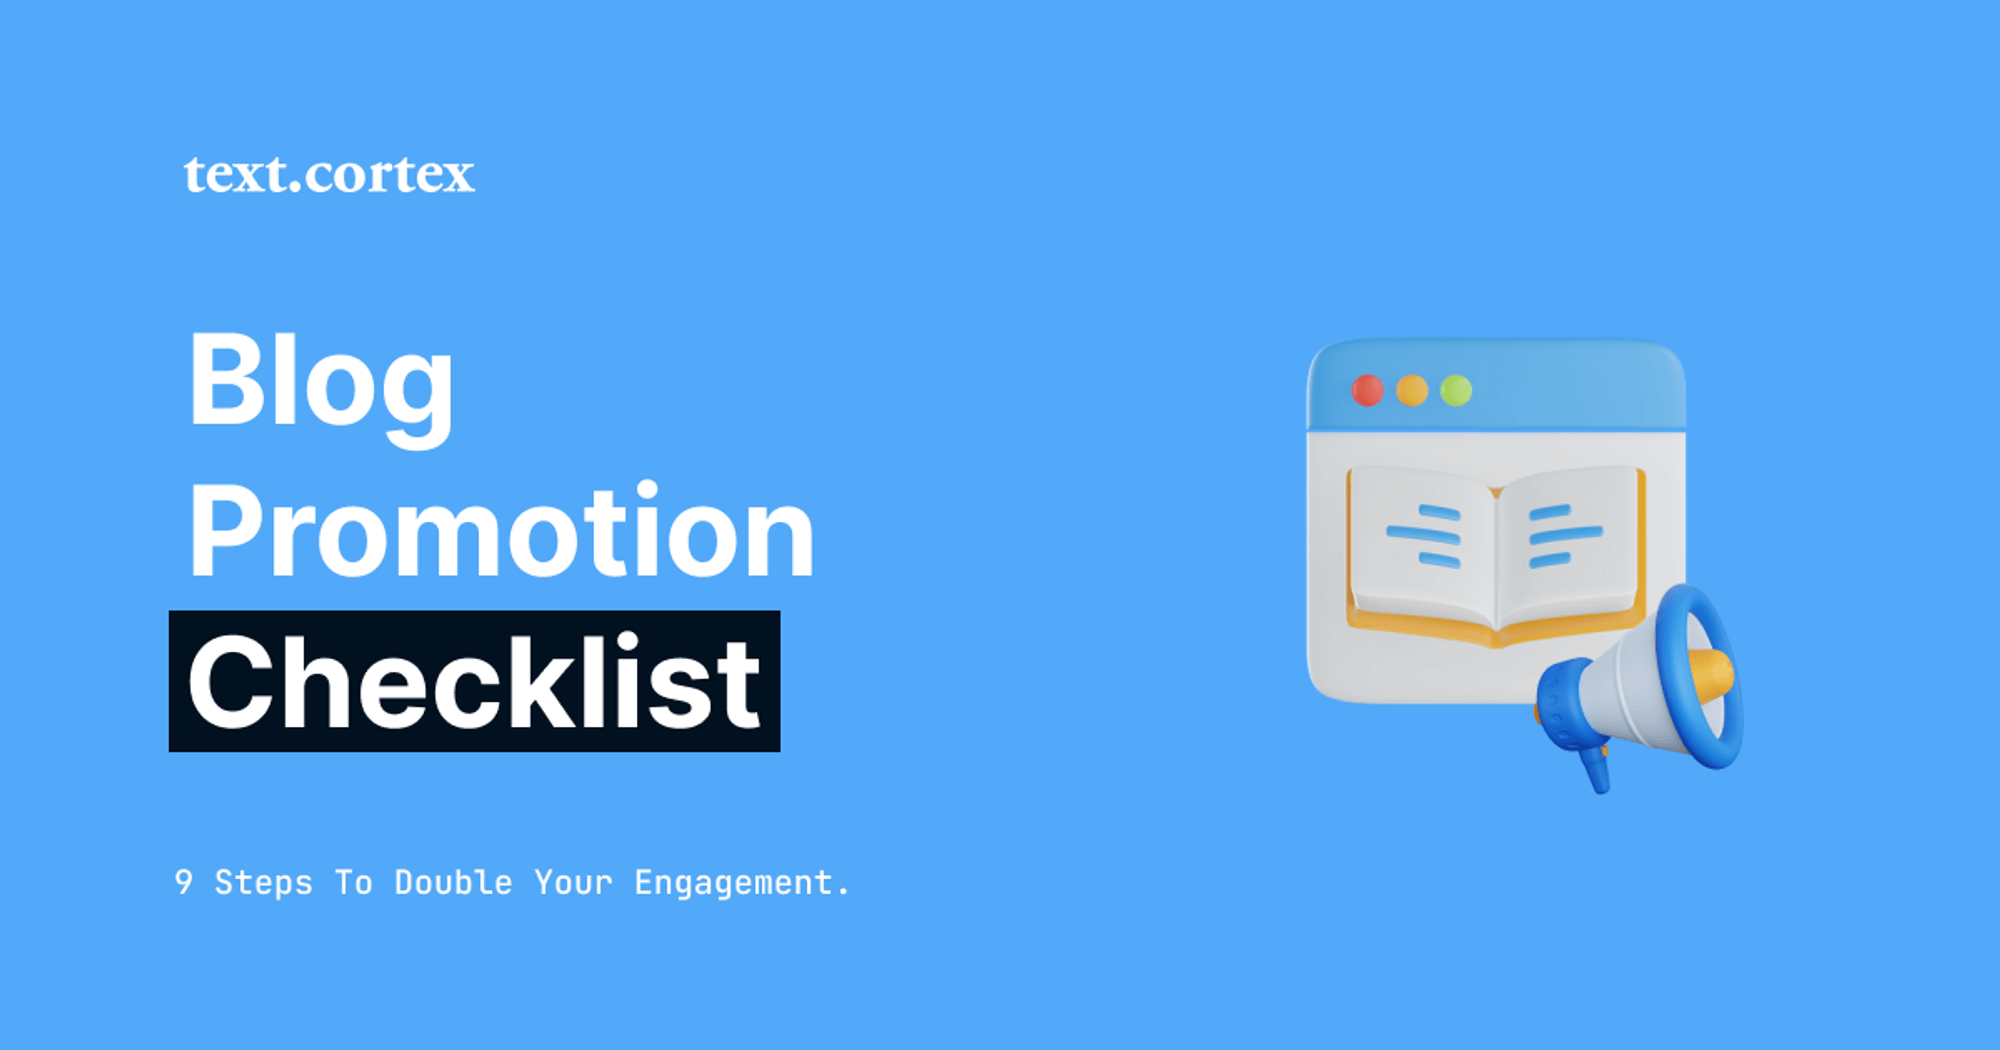 Blog Promotion Checklist — 9 Steps To Double Your Engagement